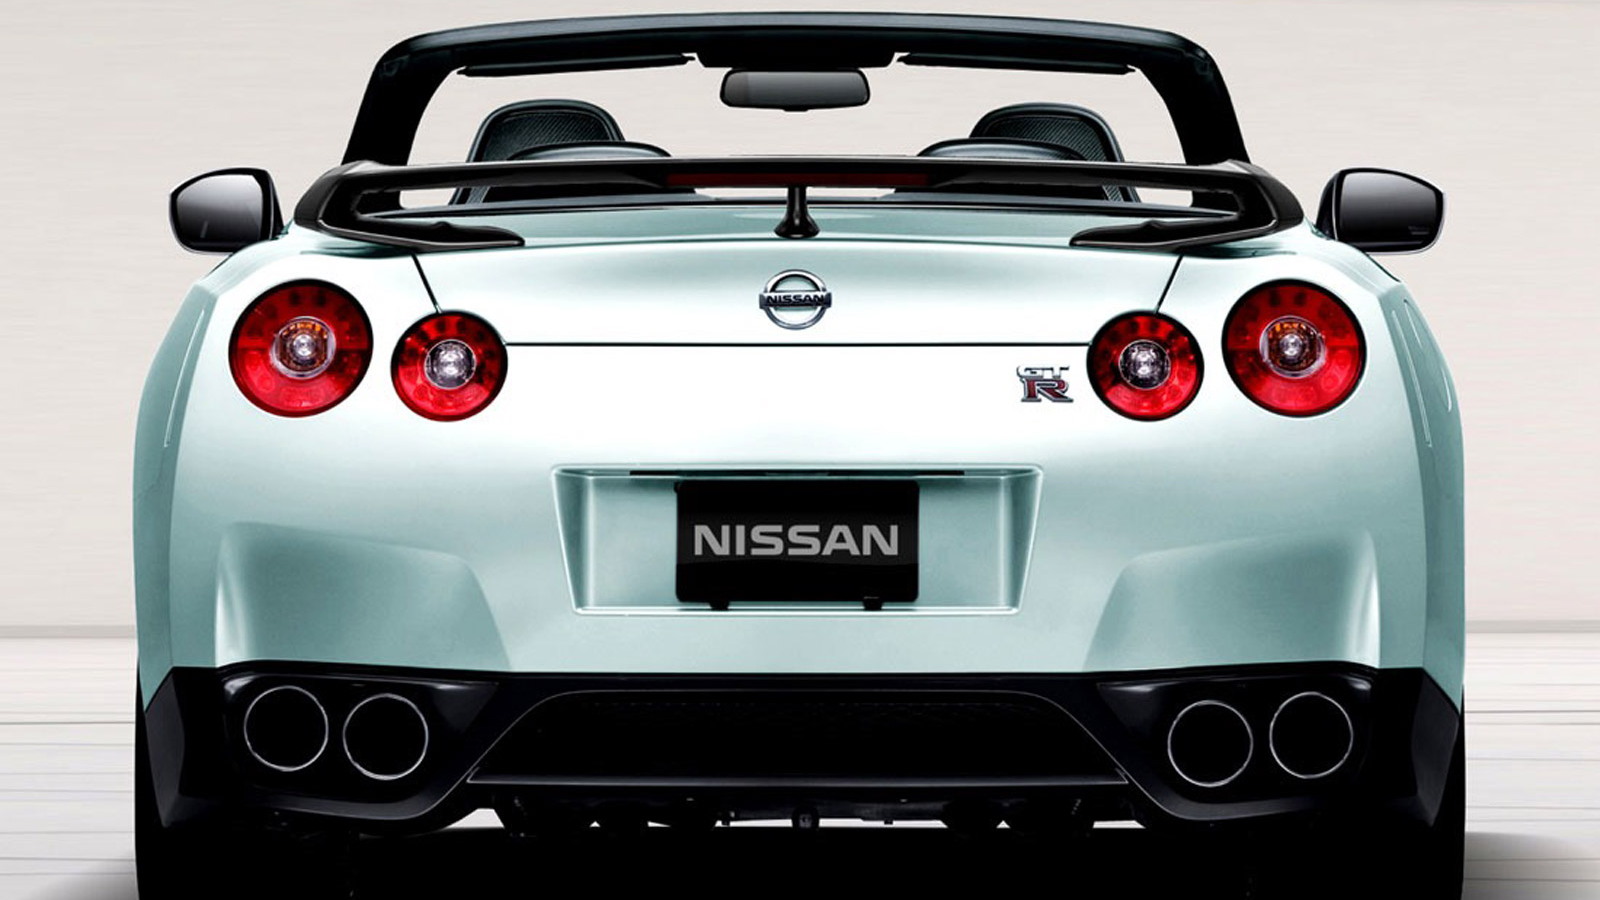 R35 Nissan GT-R convertible by Newport Convertible Engineering